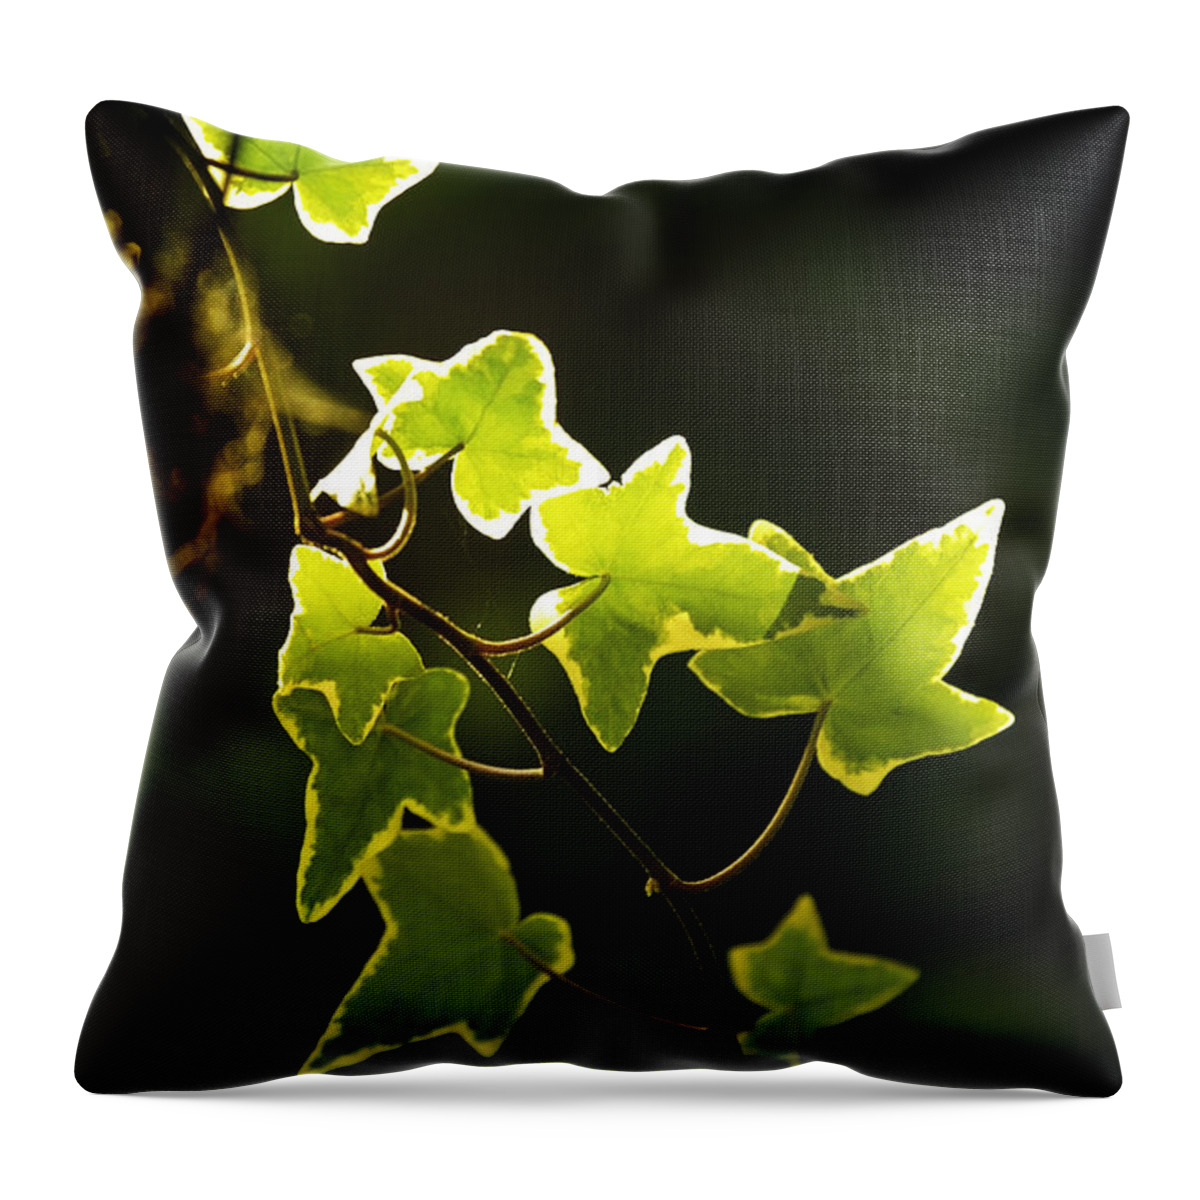 Variegated Throw Pillow featuring the photograph Variegated Vine by Richard J Thompson 